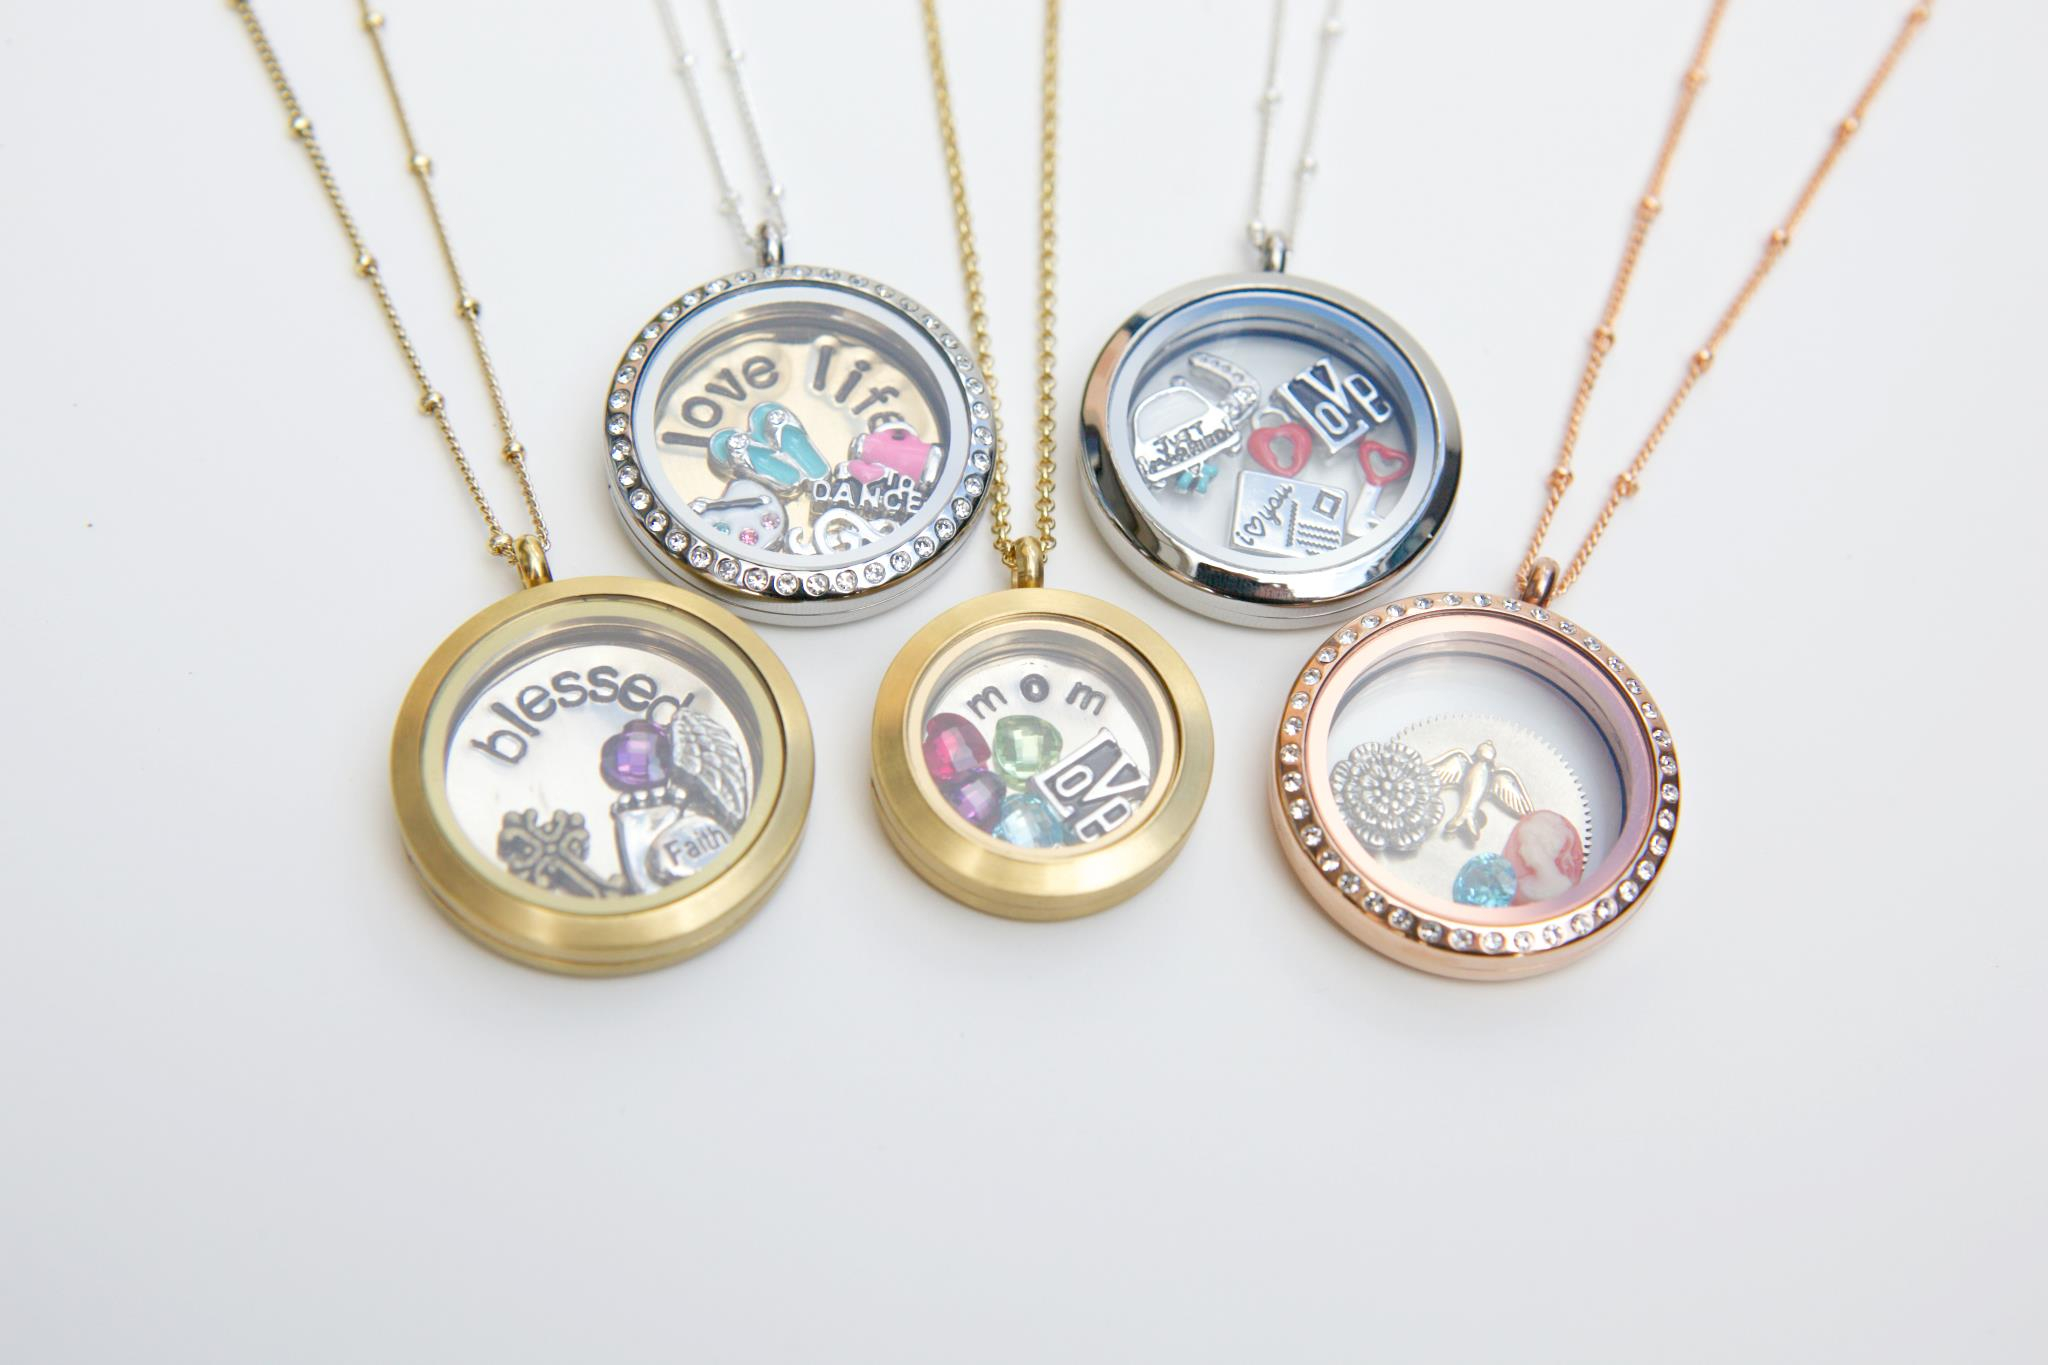 Charms For Origami Owl Buy Origami Owl Jewelry Online Charms Necklace Products